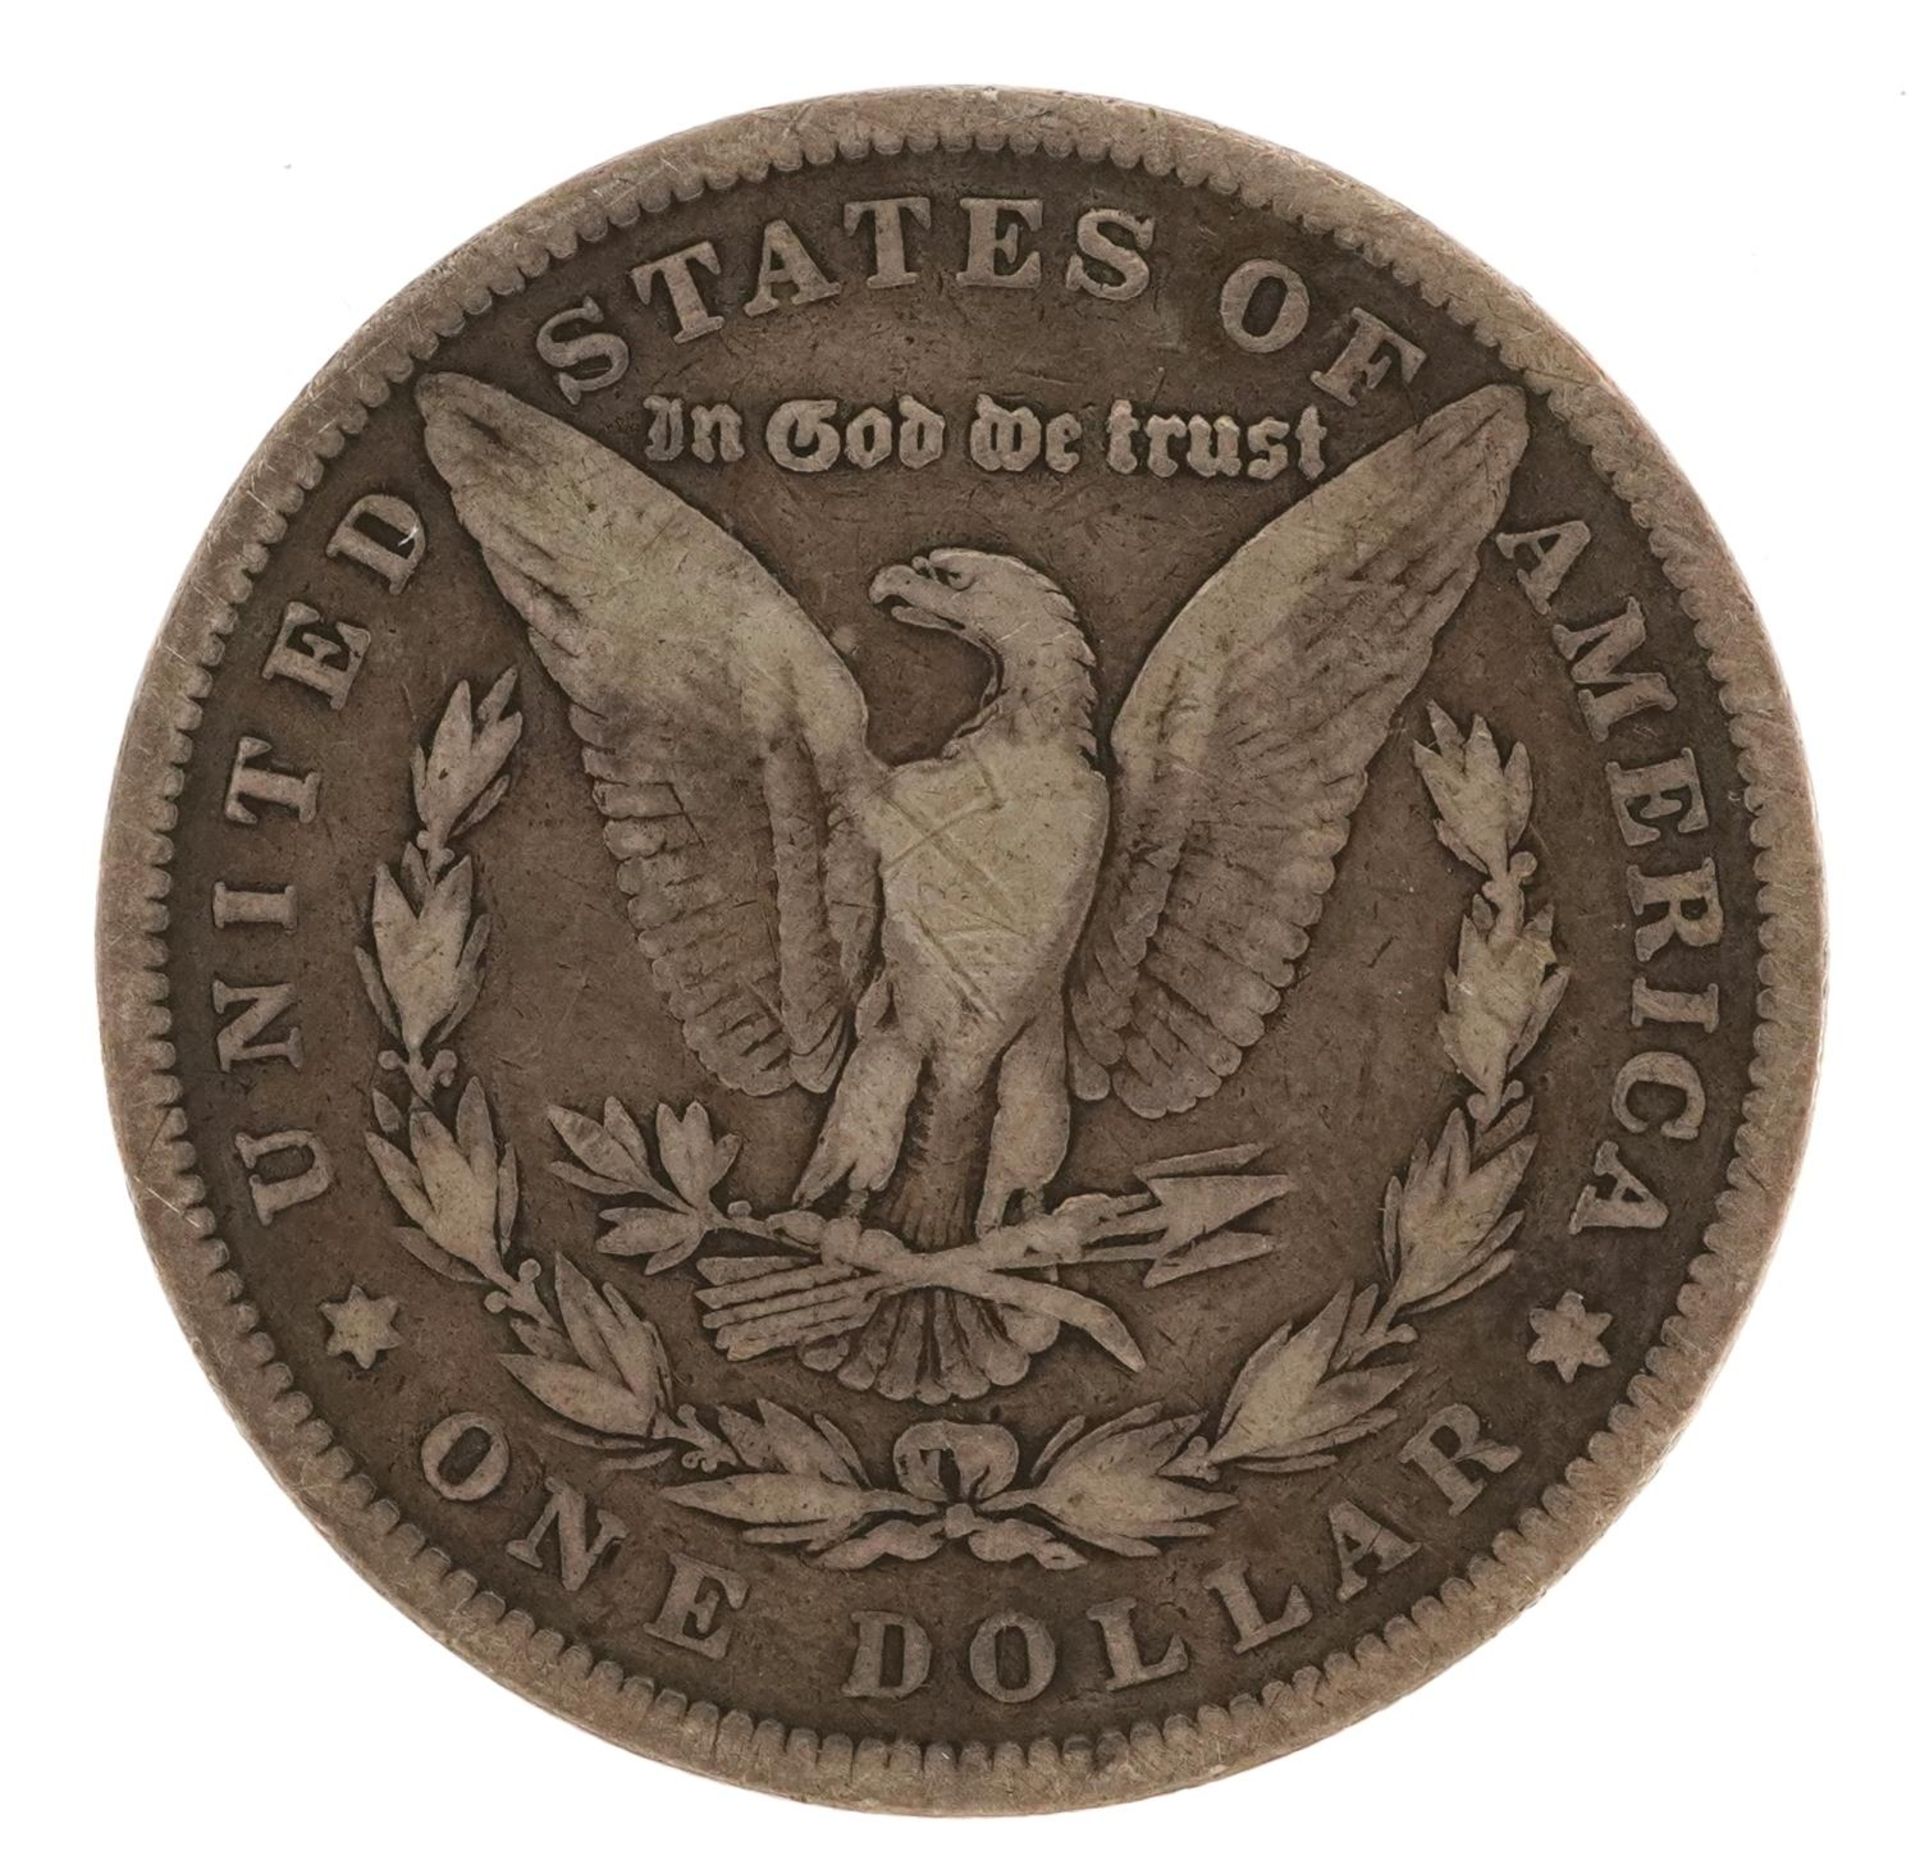 United States of America 1881 silver dollar : For further information on this lot please contact the